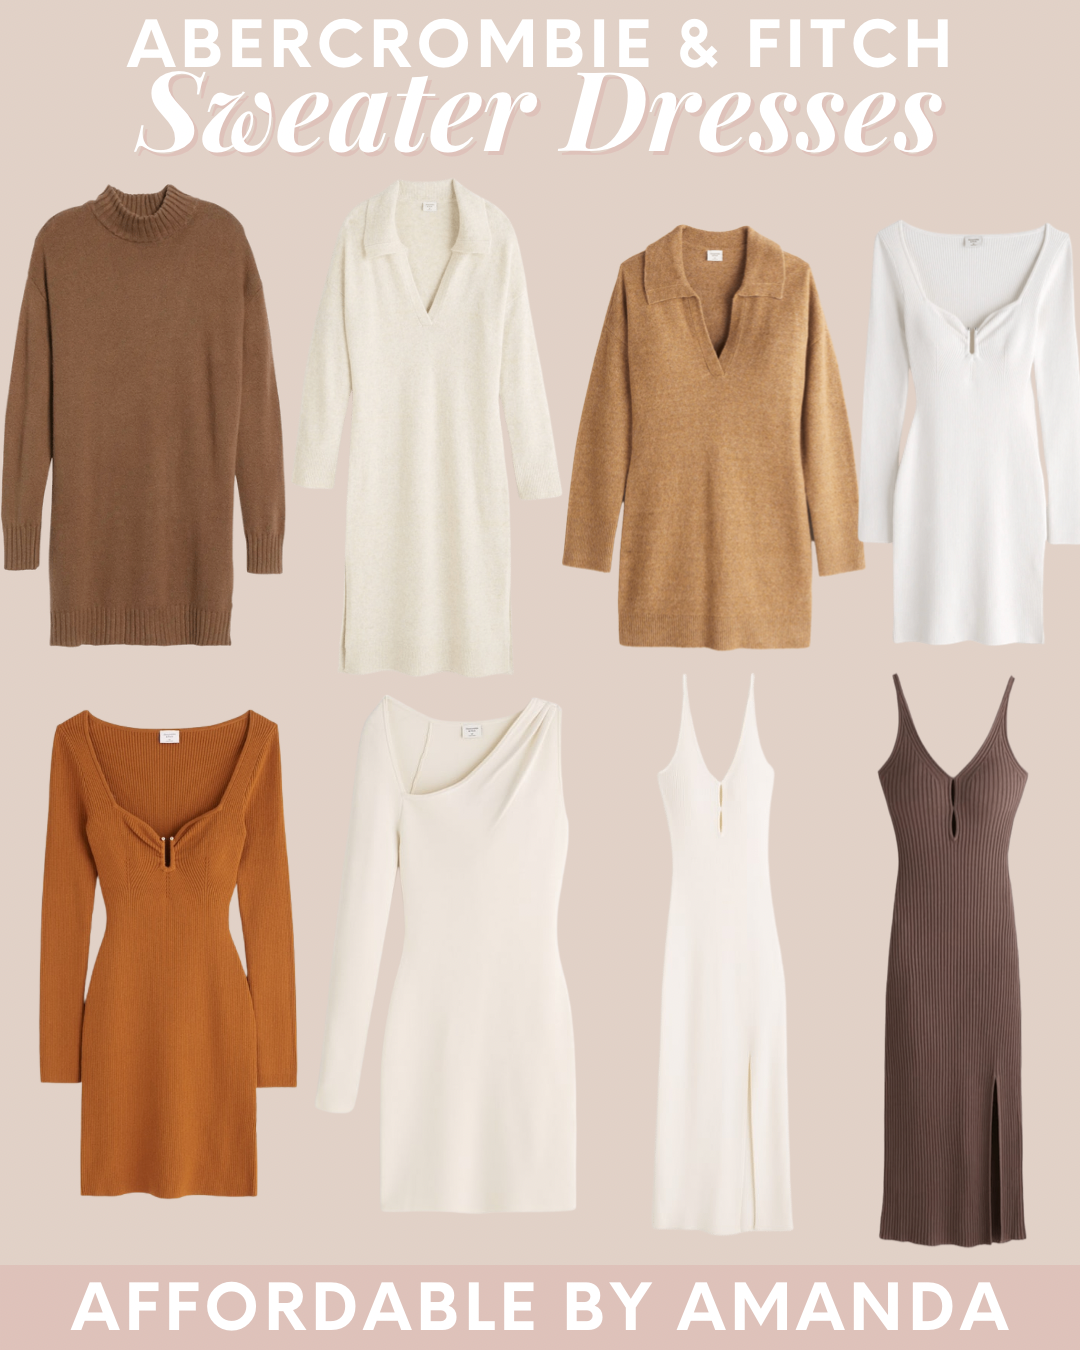 Abercrombie & Fitch Sweater Dresses for Fall - Affordable by Amanda 